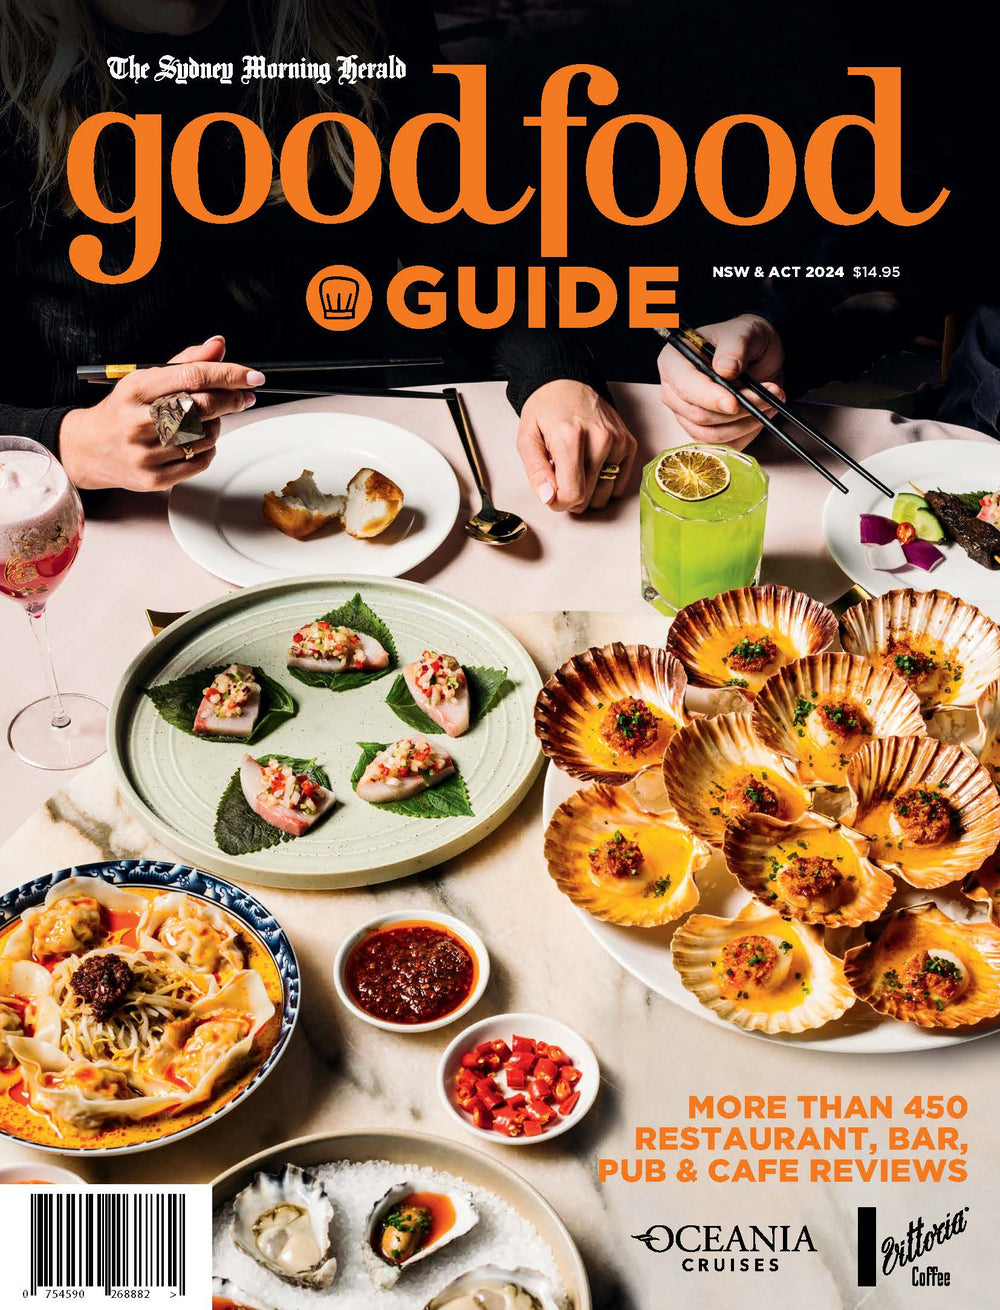 The NSW Good Food Guide 2024